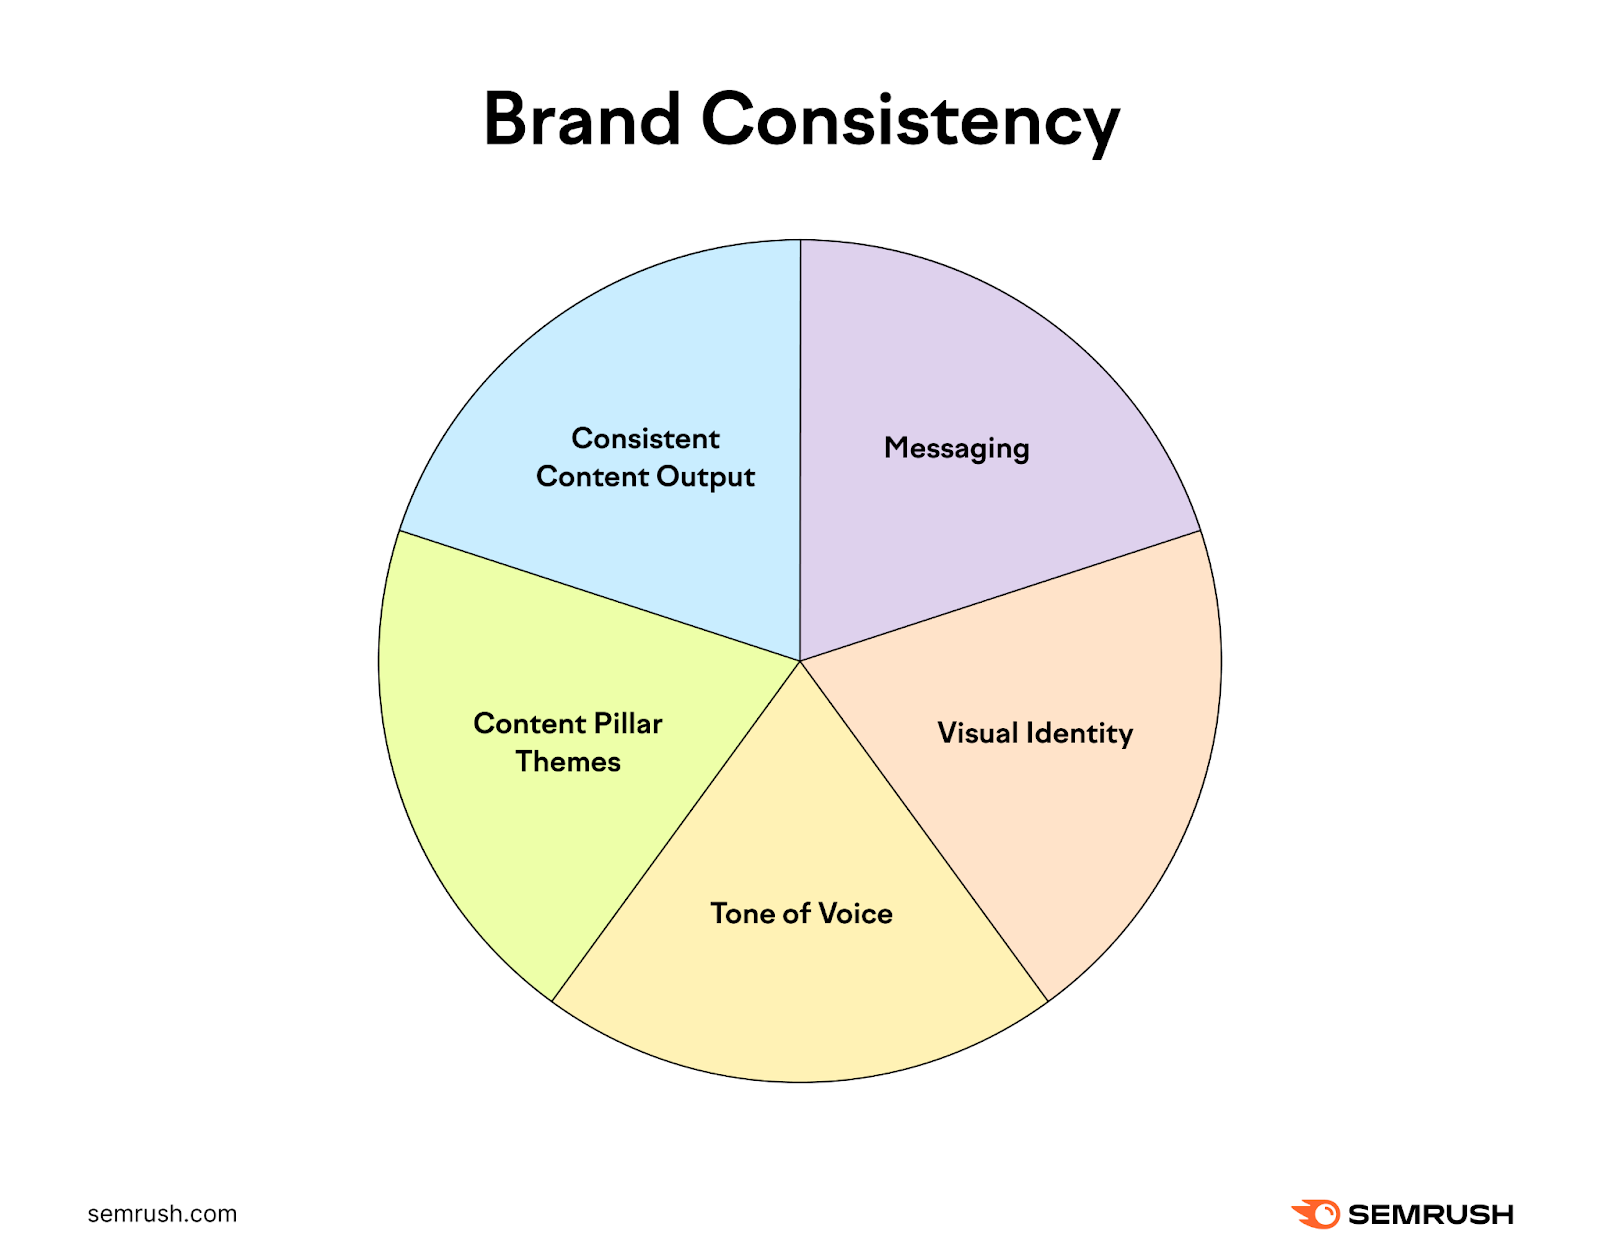 Pie chart entitled “Brand consistency” with the different segments entitled “Regular Content”, “Messaging”, “Visual Identity”, “Tone of Voice”, and “Themes”.